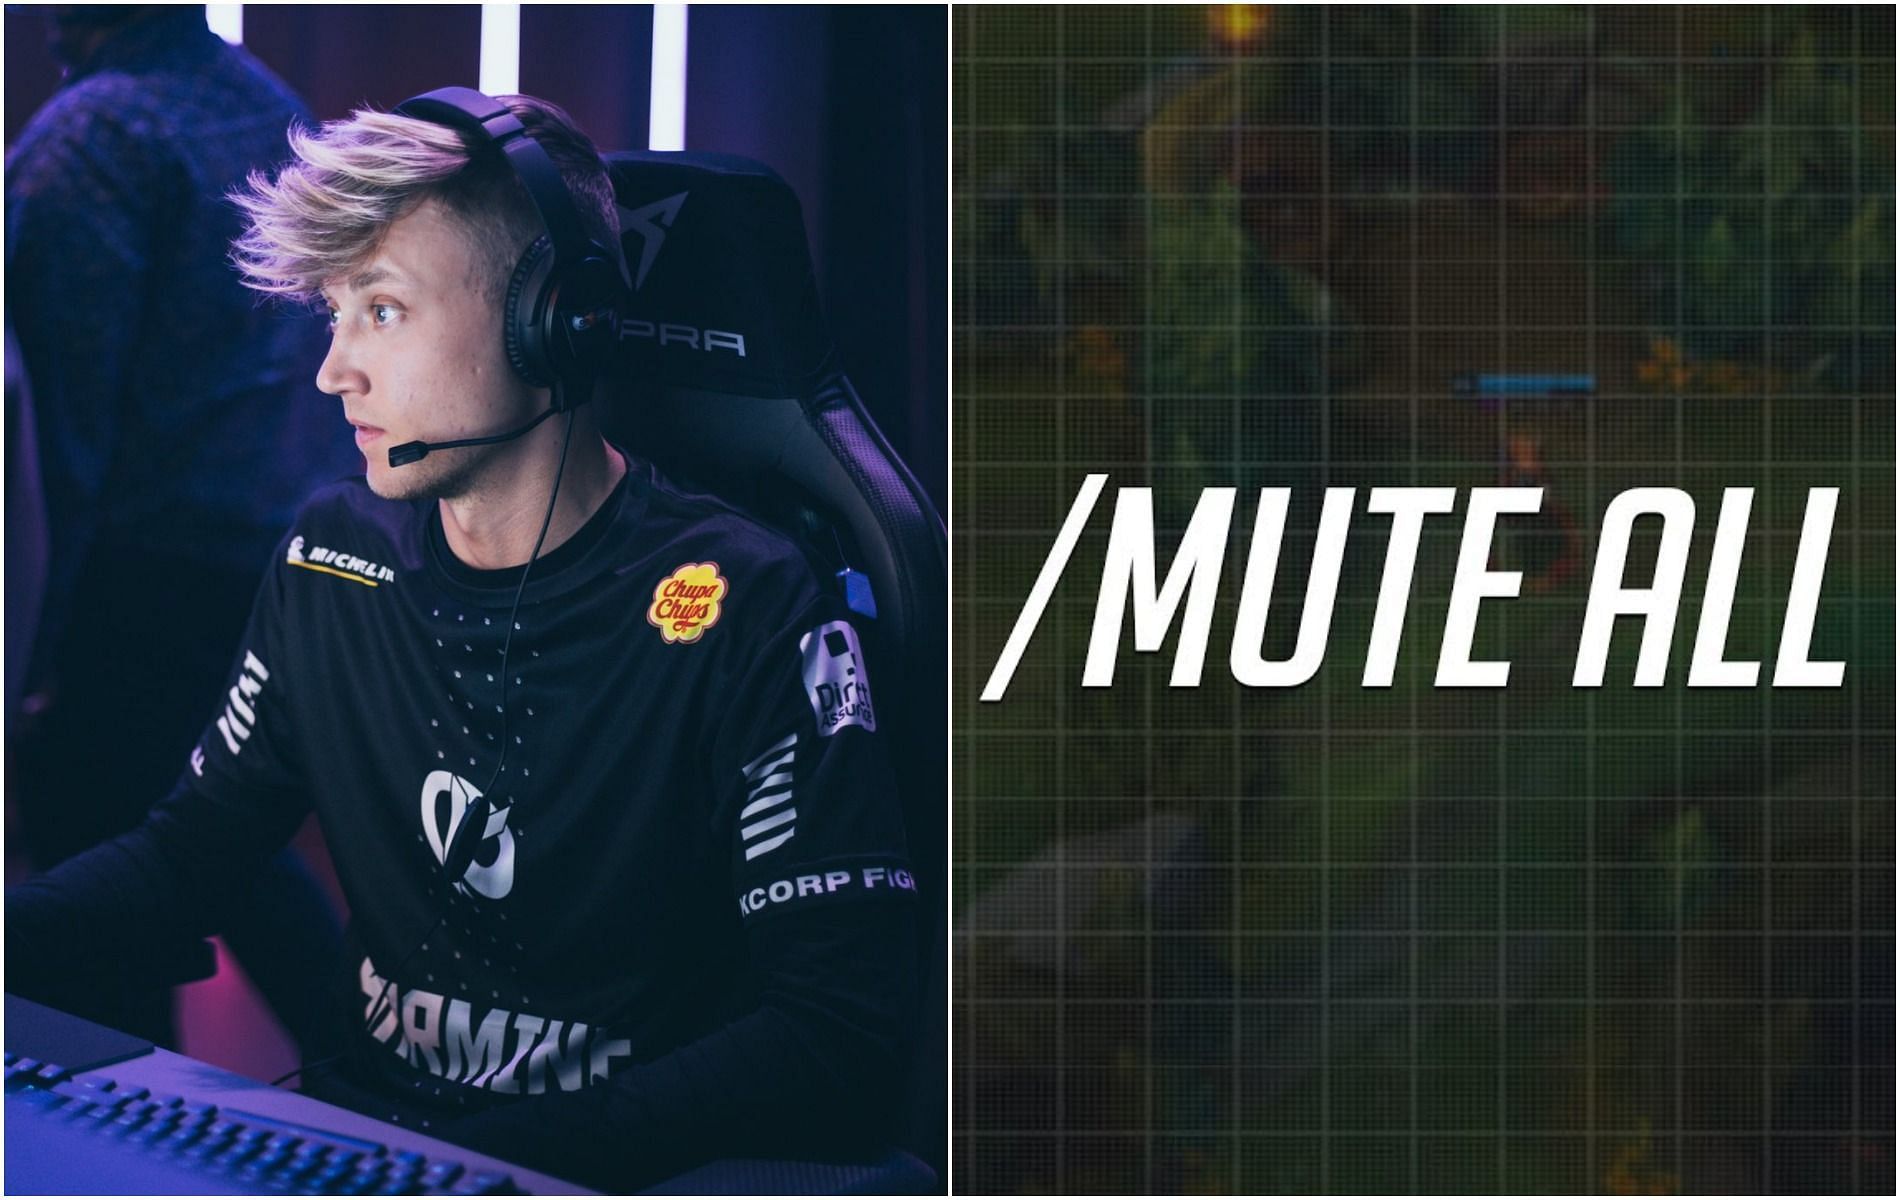 League of Legends ADC Rekkles mutes the entire server when in solo-queue (Image via Sportskeeda)